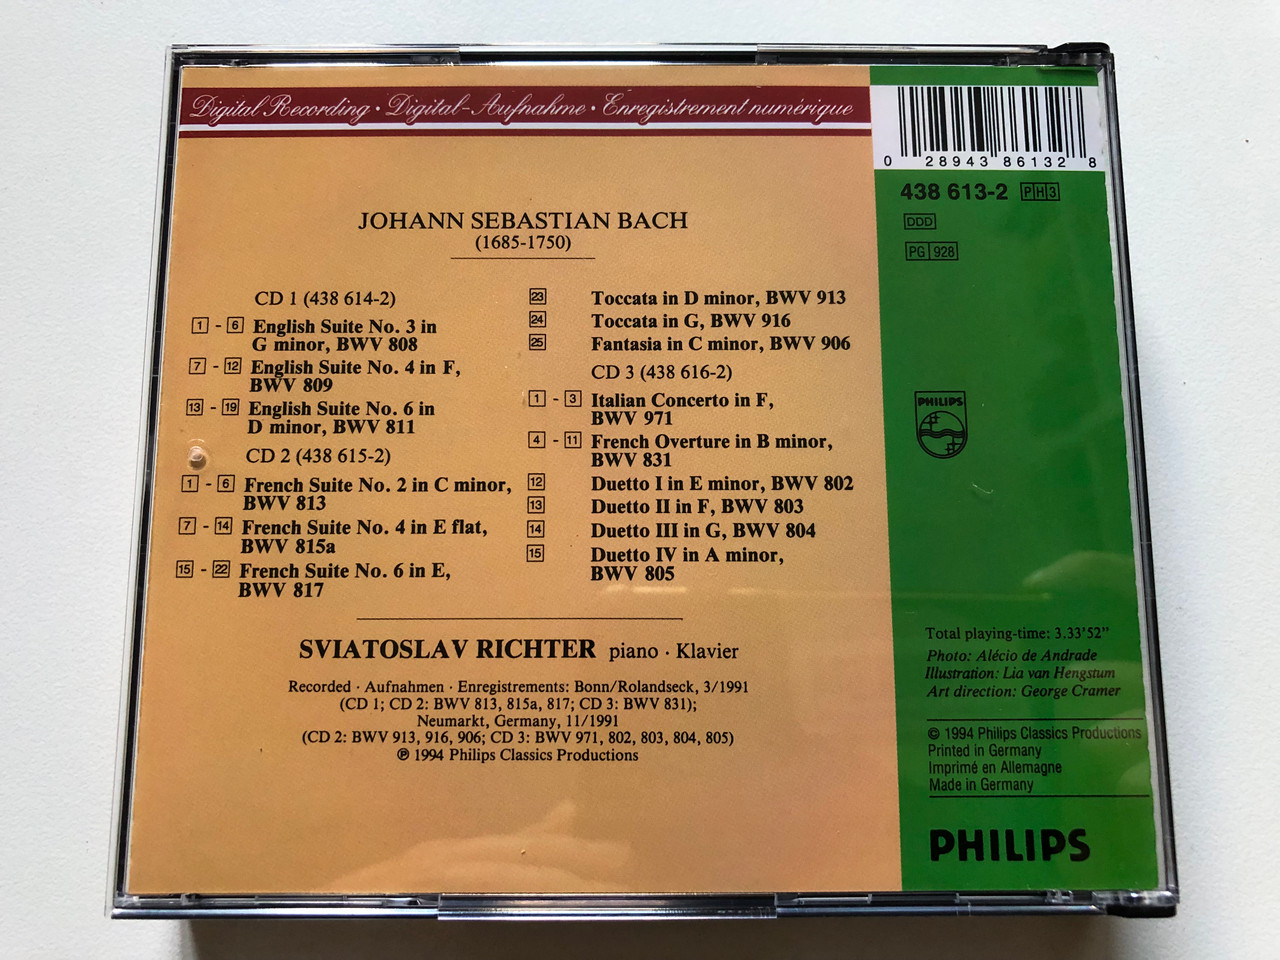 https://cdn10.bigcommerce.com/s-62bdpkt7pb/products/0/images/312361/Richter_The_Authorised_Recordings_-_Bach_Philips_3x_Audio_CD_1994_438_613-2_2__23924.1699997168.1280.1280.JPG?c=2